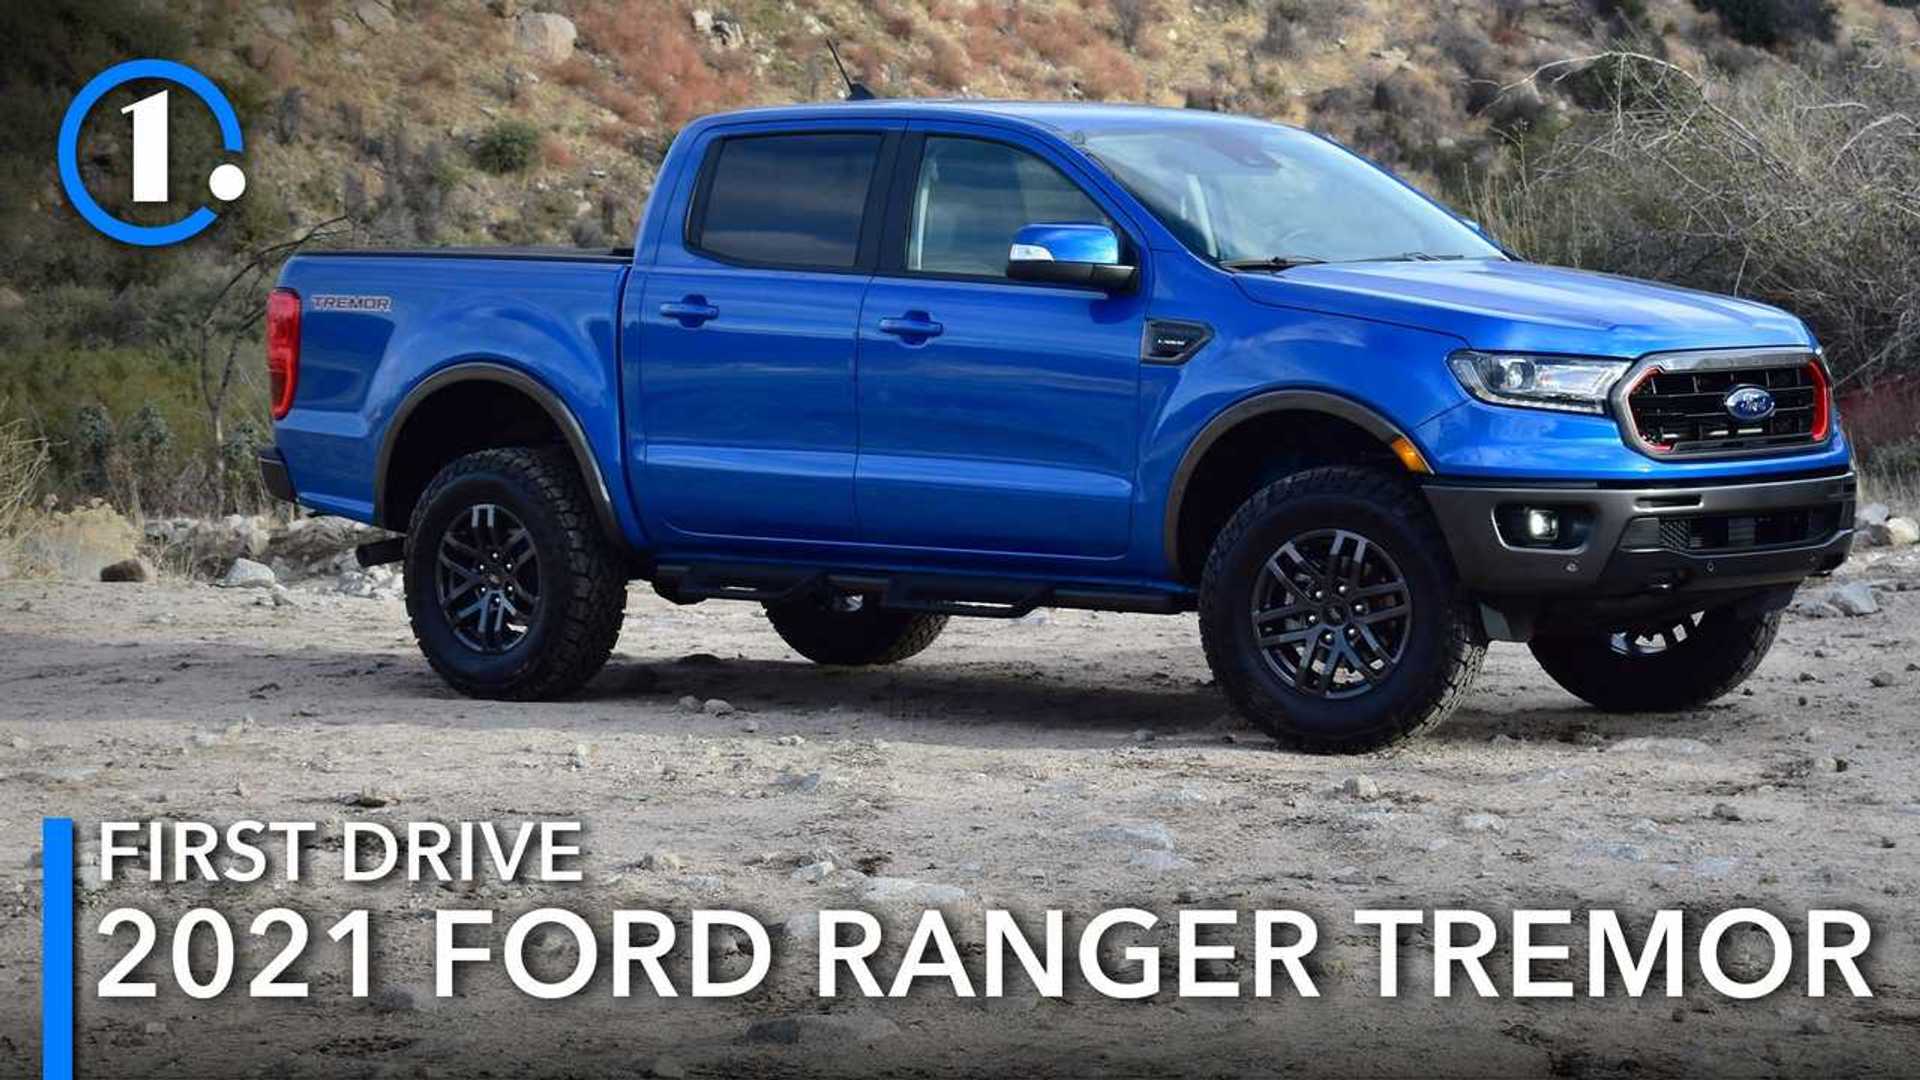 2021 Ford Ranger Tremor First Drive Review: Just Enough Truck